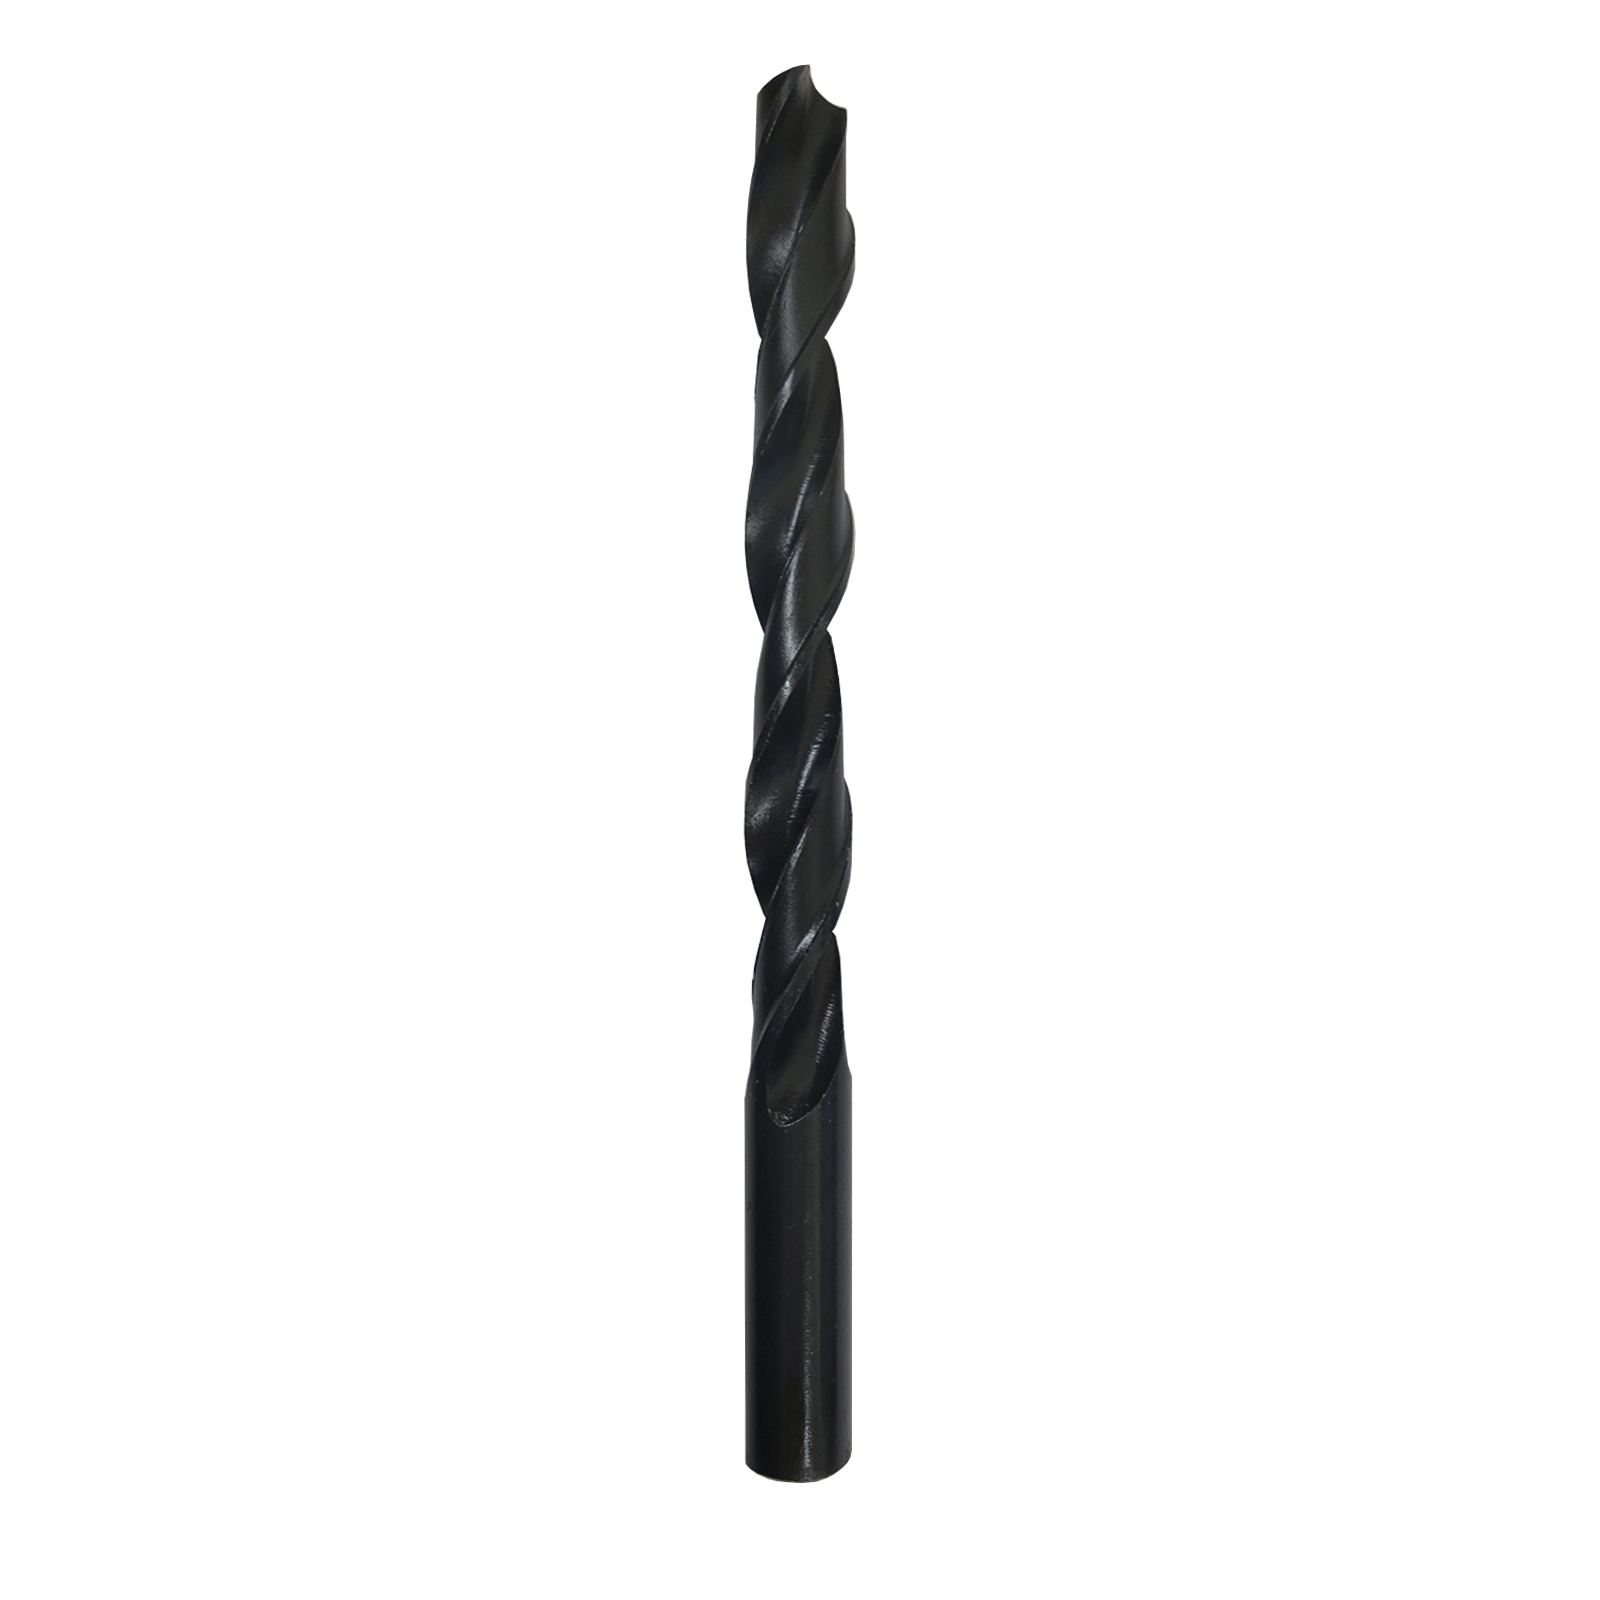 Gyros 45-42098 Premium (Made in US) Industrial Grade HSS Black Oxide Metric Drill Bit, 8 mm, Pack of 6